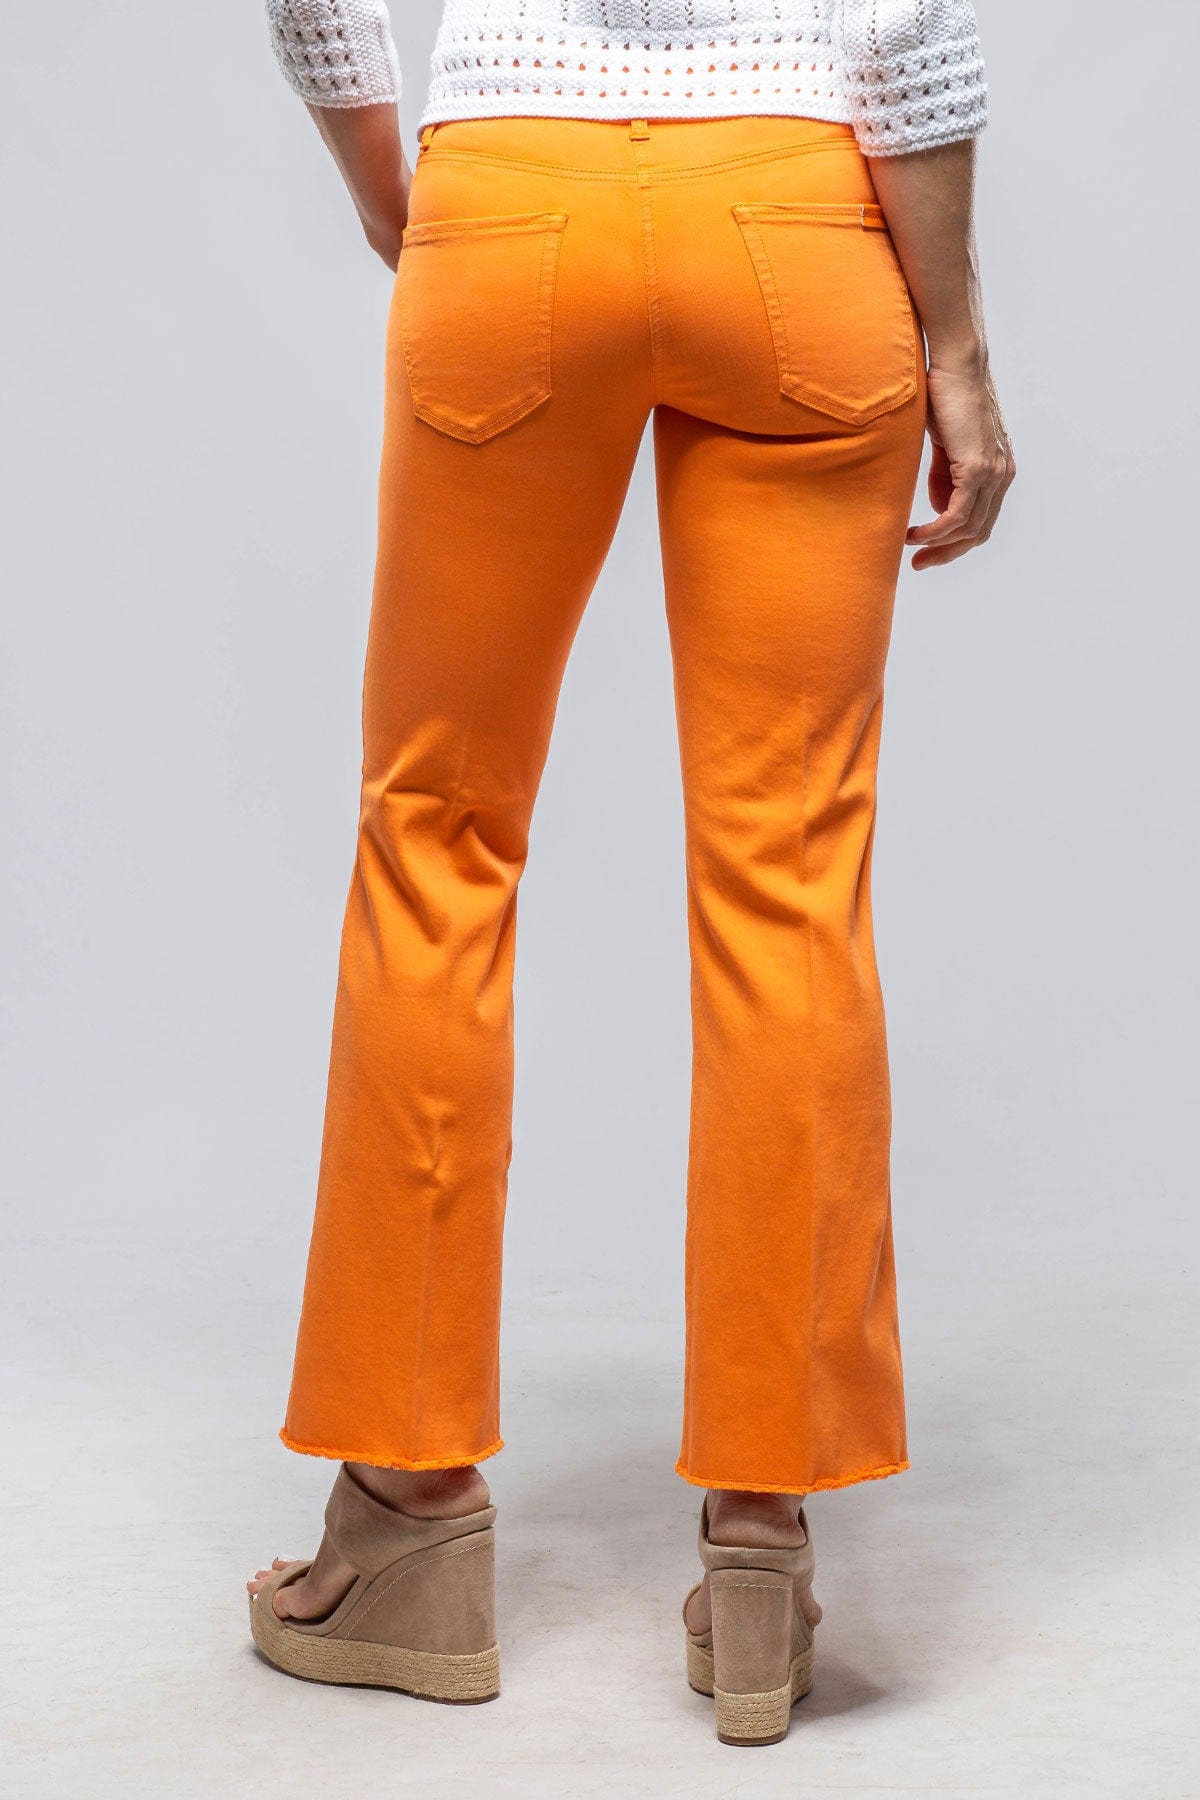 Dolcezza 24207 Orange Cropped Jean Style Trousers